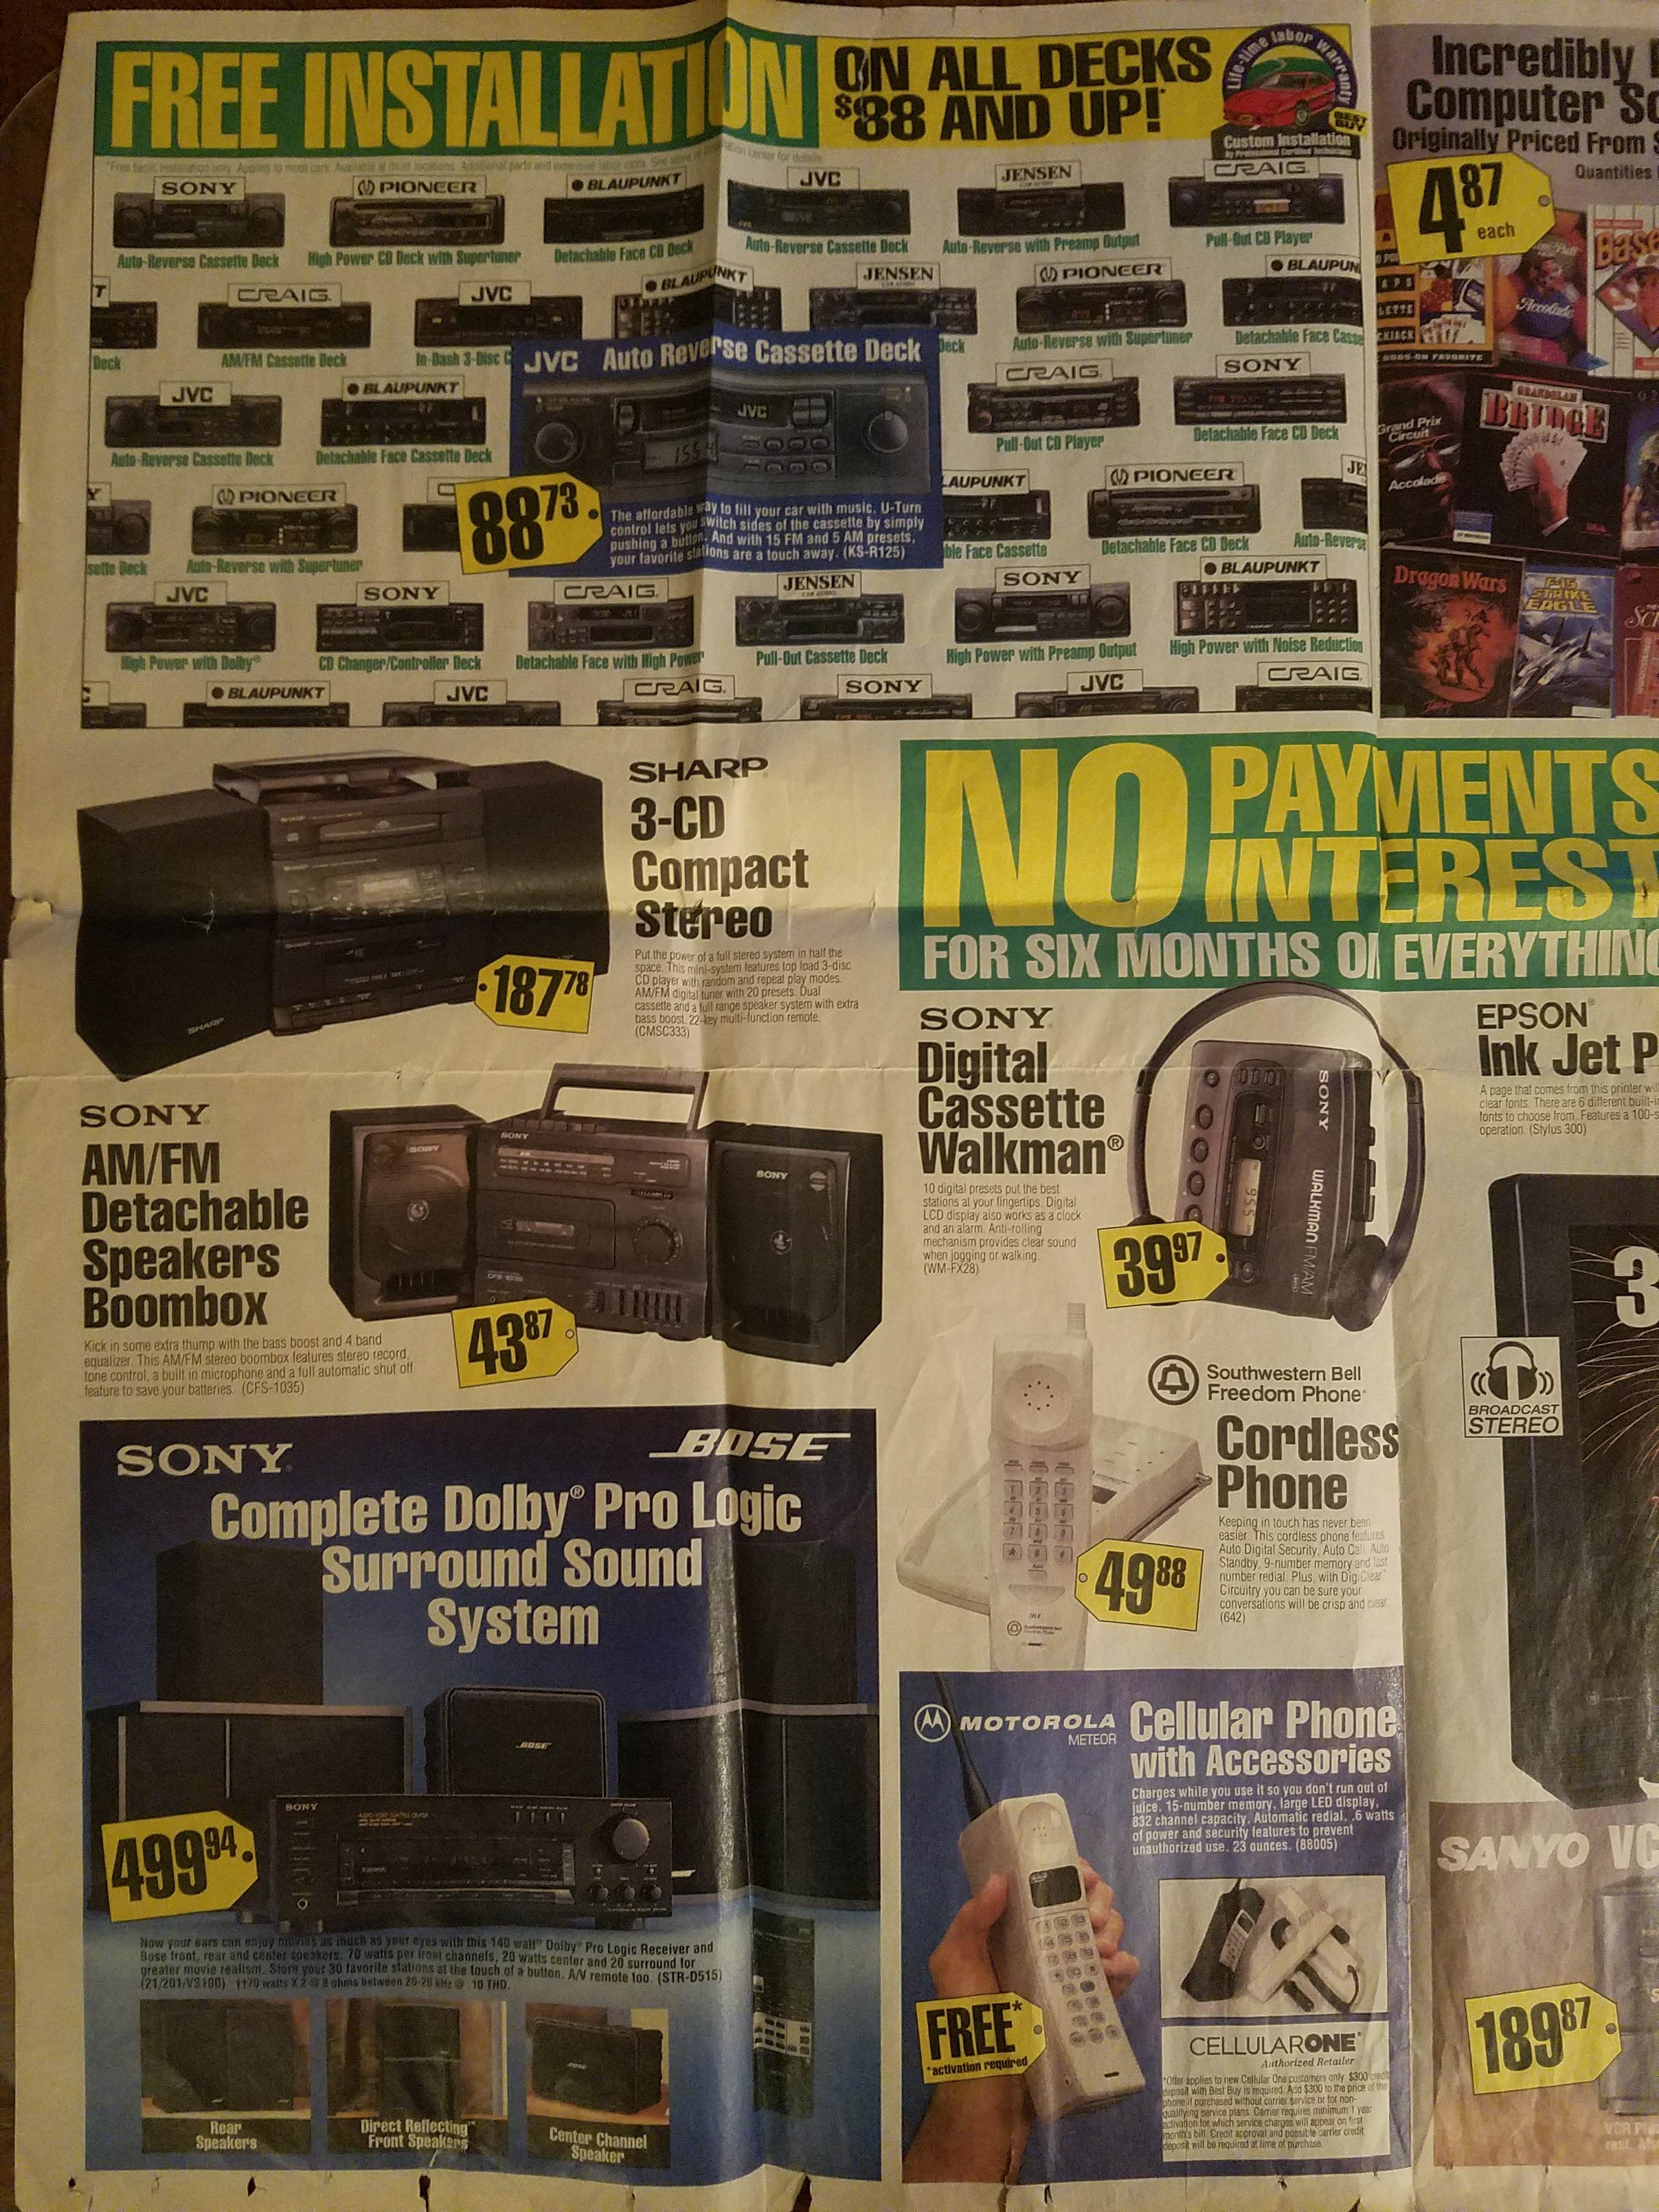 90s best buy flyer - Free Installatin On All Decks Incredibly Computer Sc Potre 87 8878 Sharp 3Cd Compact Stereo Ayments Ere For Six Months Oi Everything Epson Digital Ink Jet P Cassette Walkman AmFm Detachable Speaker's Boombox Base Cordless Phone Sony C